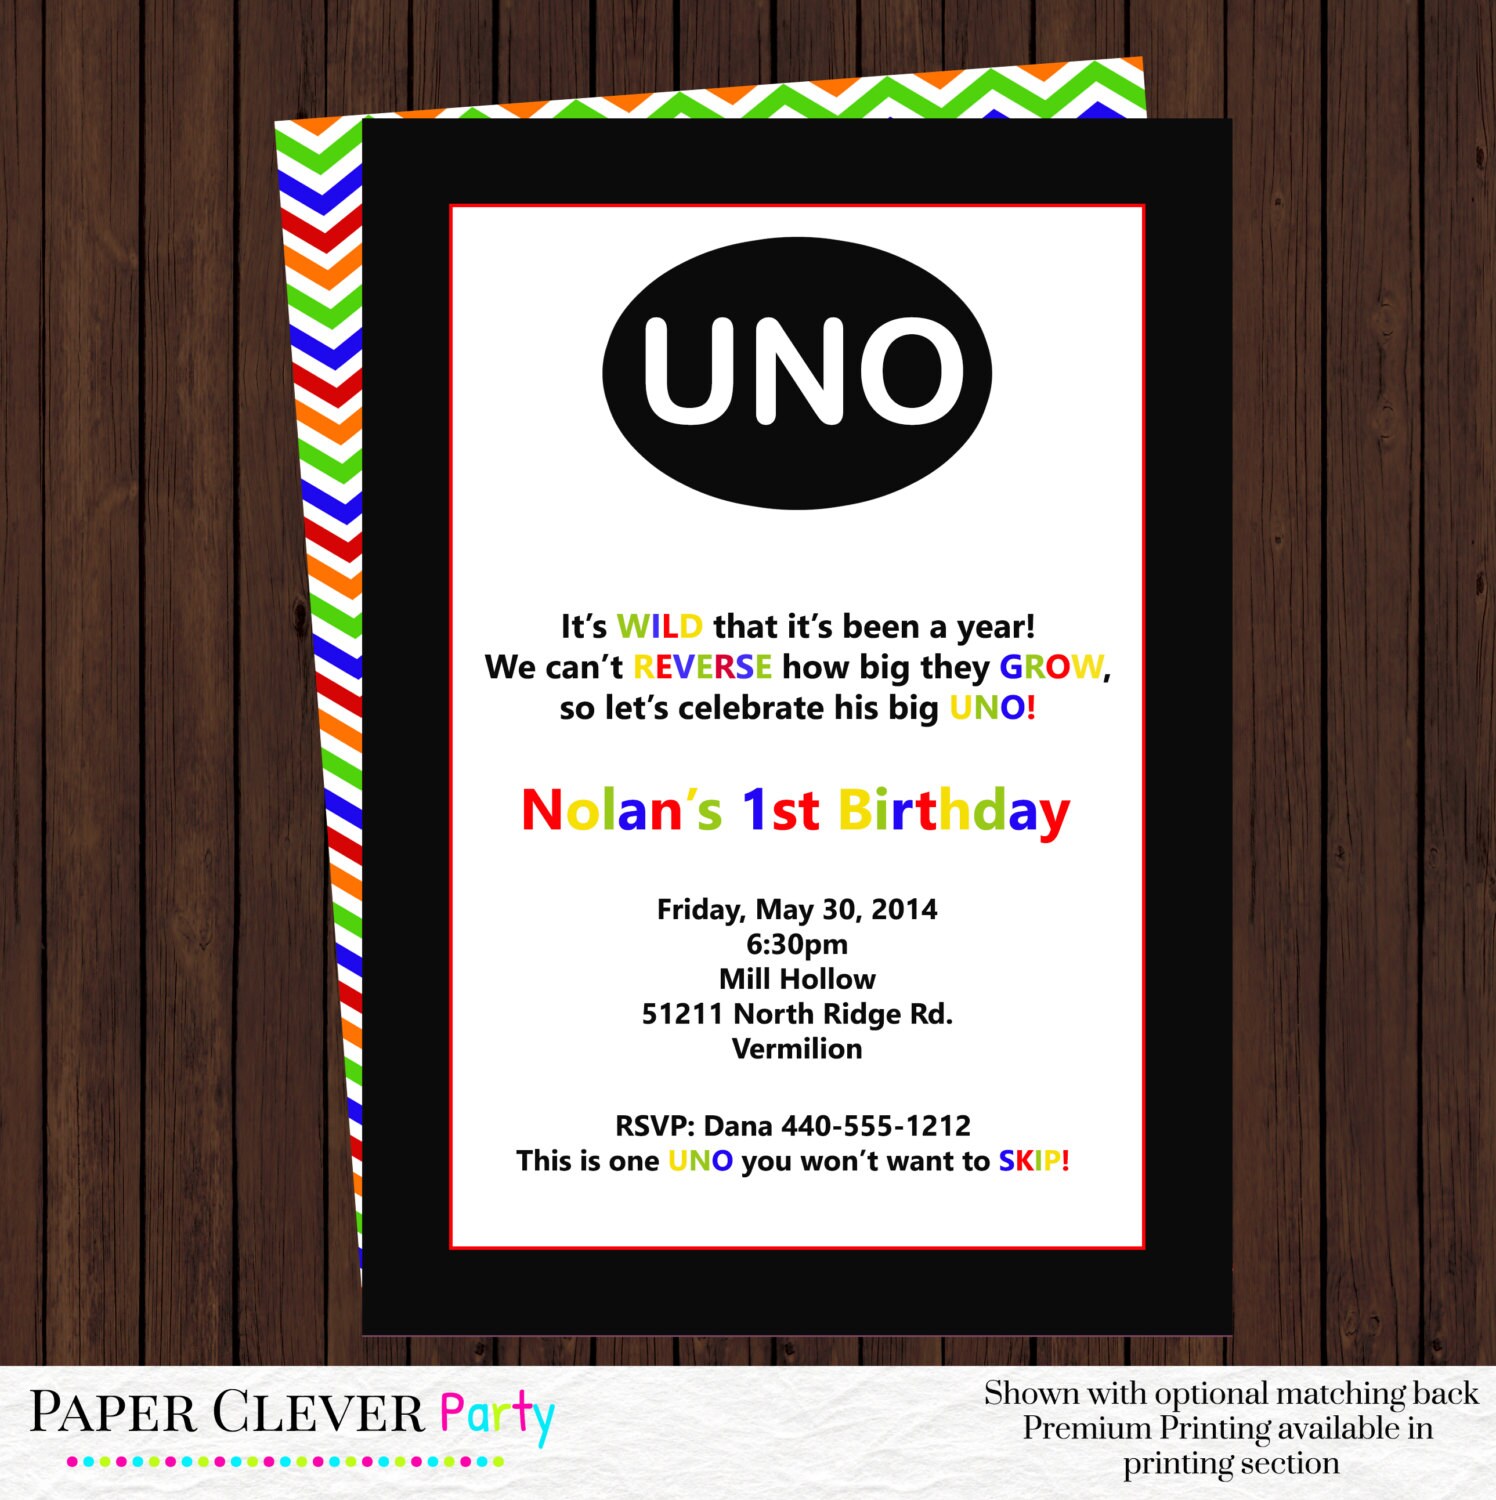 UNO birthday party invitations first by papercleverparty on Etsy